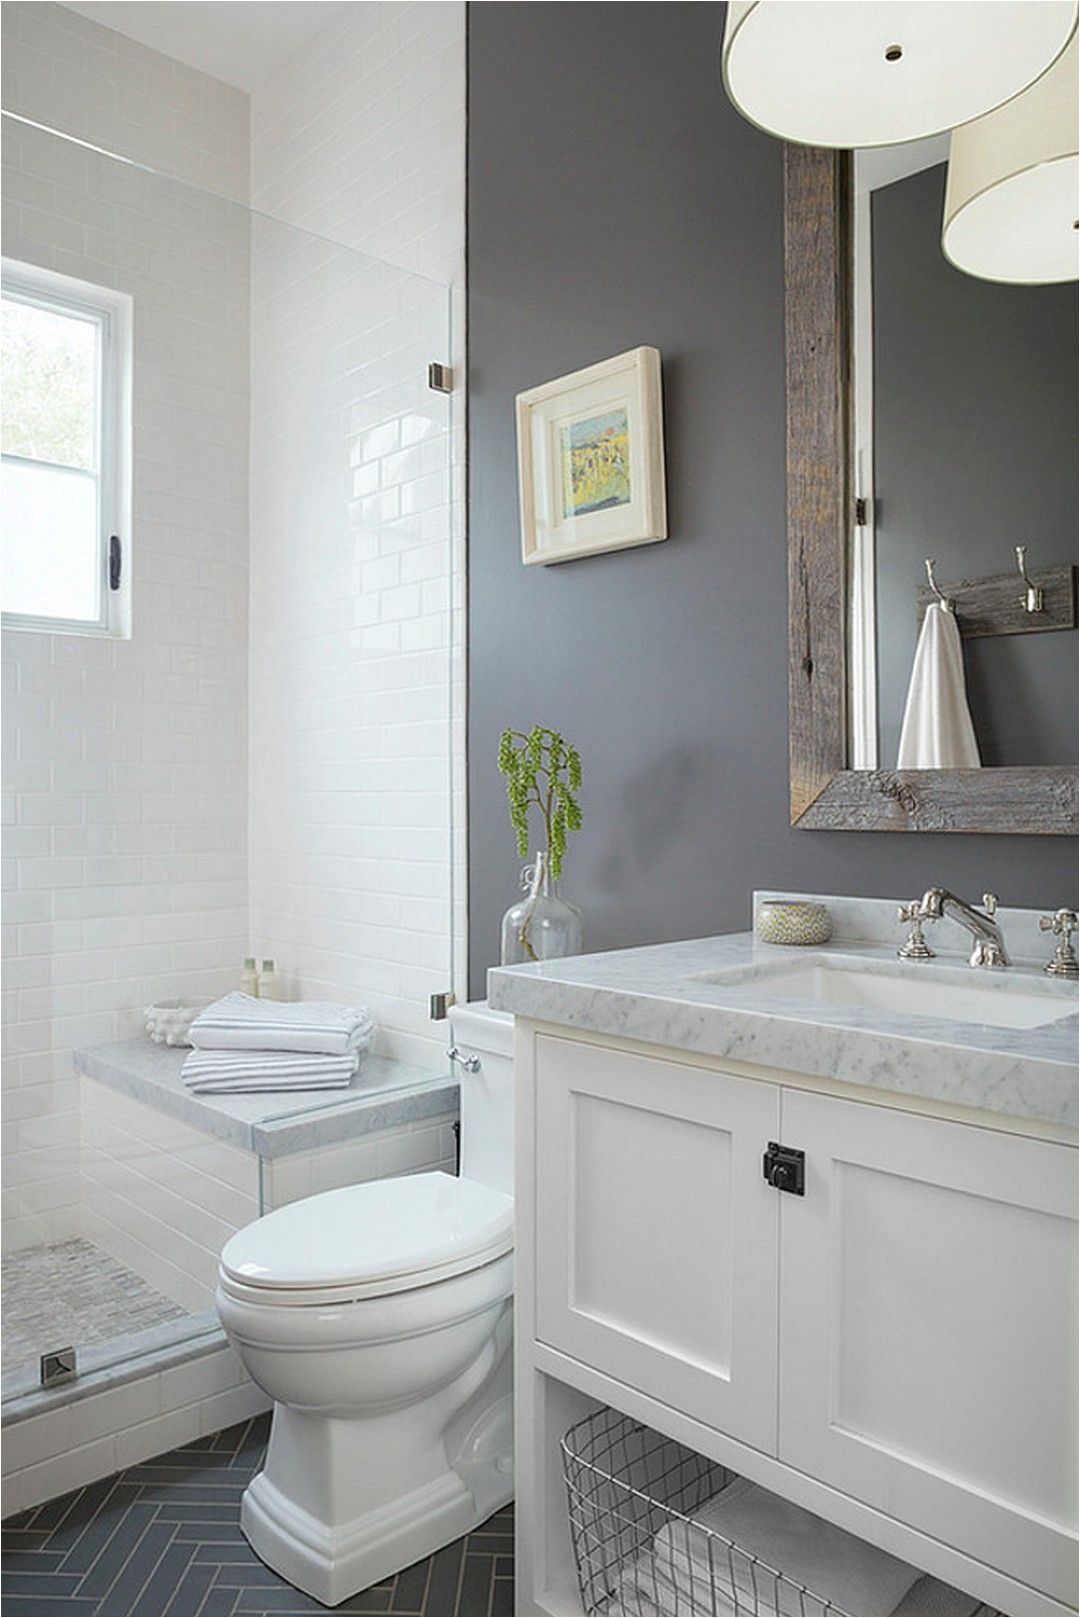 99 small but stylidh bathrooms Beautiful bathroom dark walls and dark floors offset by a bright shower and sink